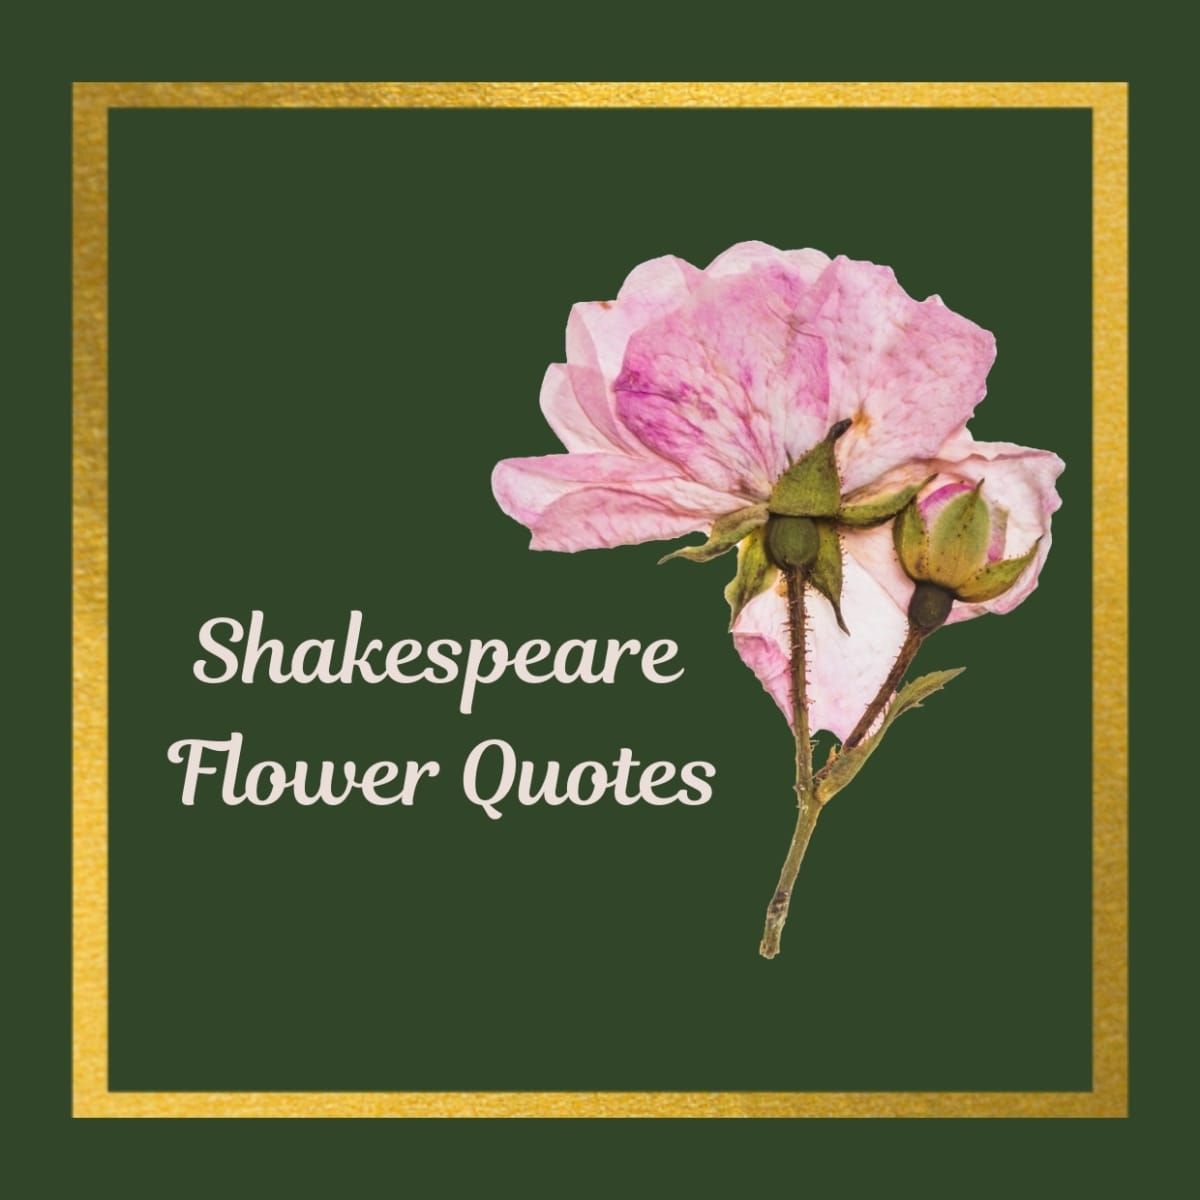 100 Shakespeare Flower Quotes - Owlcation